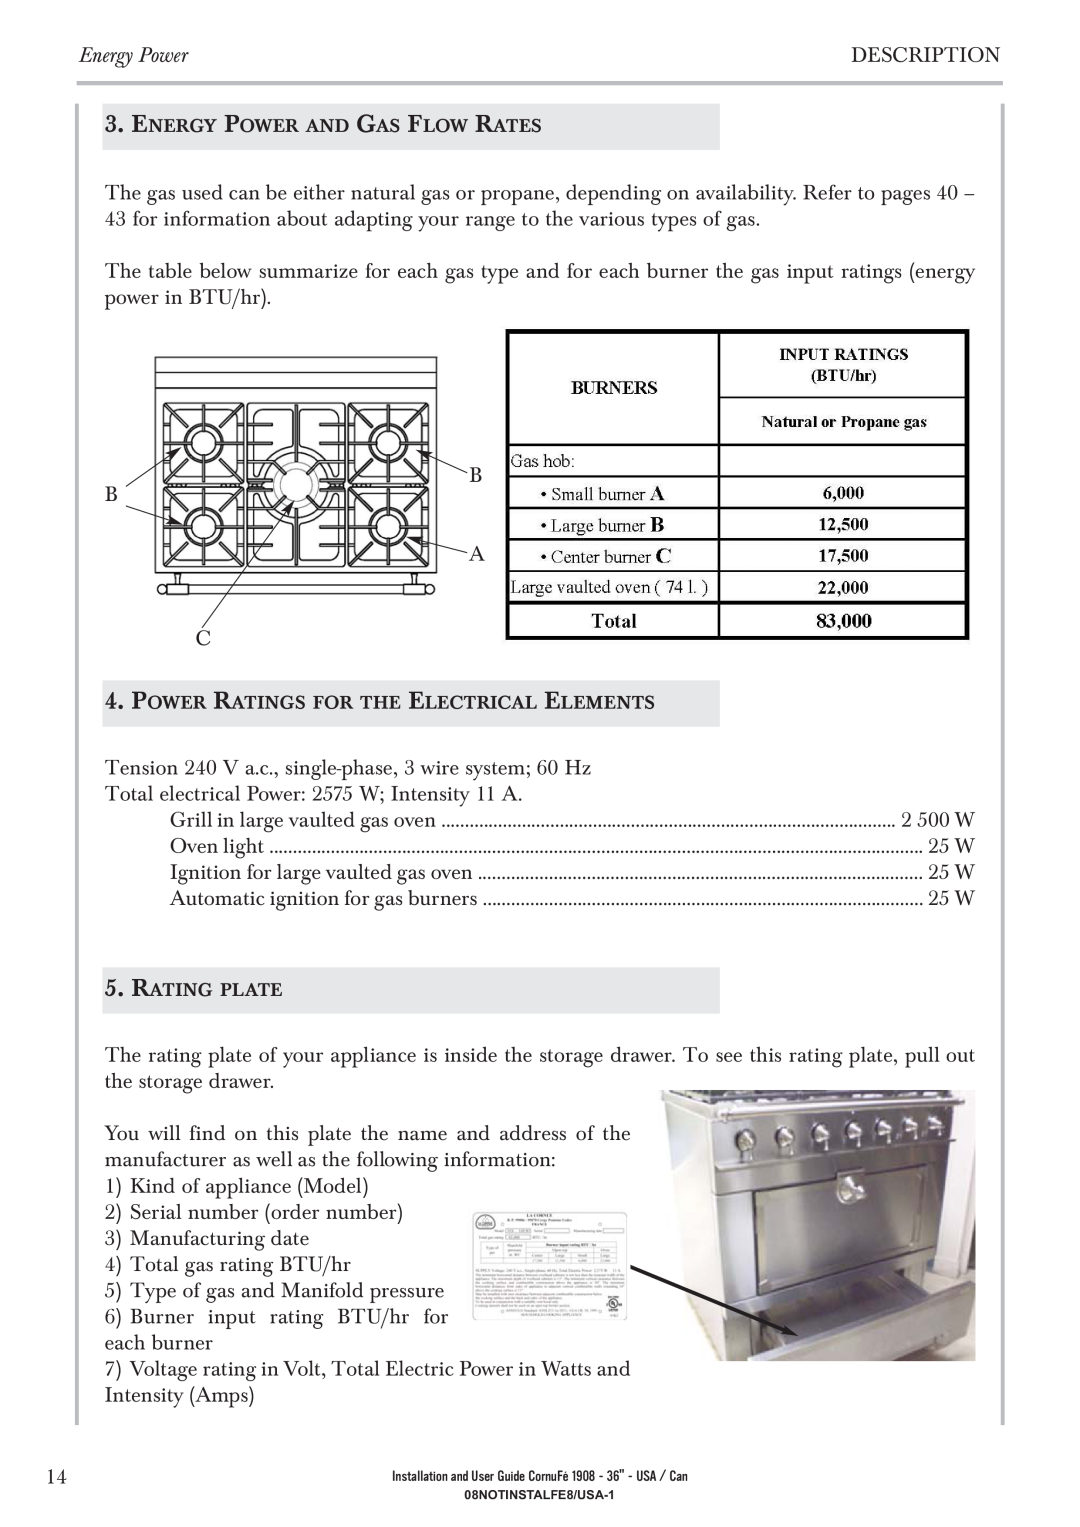 GE 1908 - 36 manual Energy Power And Gas Flow Rates, Power Ratings For The Electrical Elements, Rating Plate, Oven light 